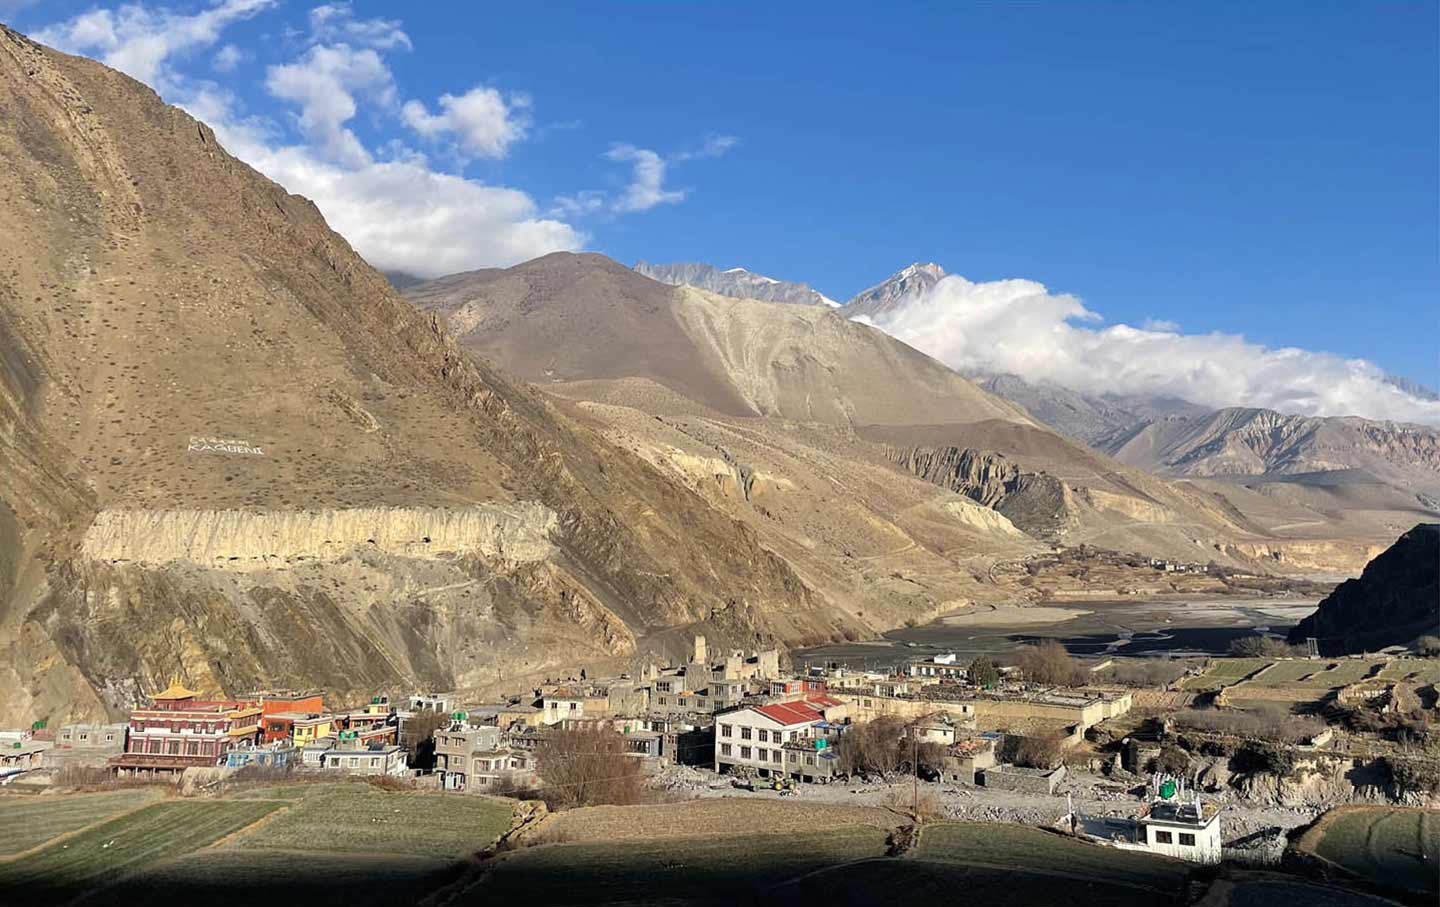 Since the 12th century, Kagbeni has been the “gateway” to the ancient Tibetan Buddhist Kingdom of Lo.